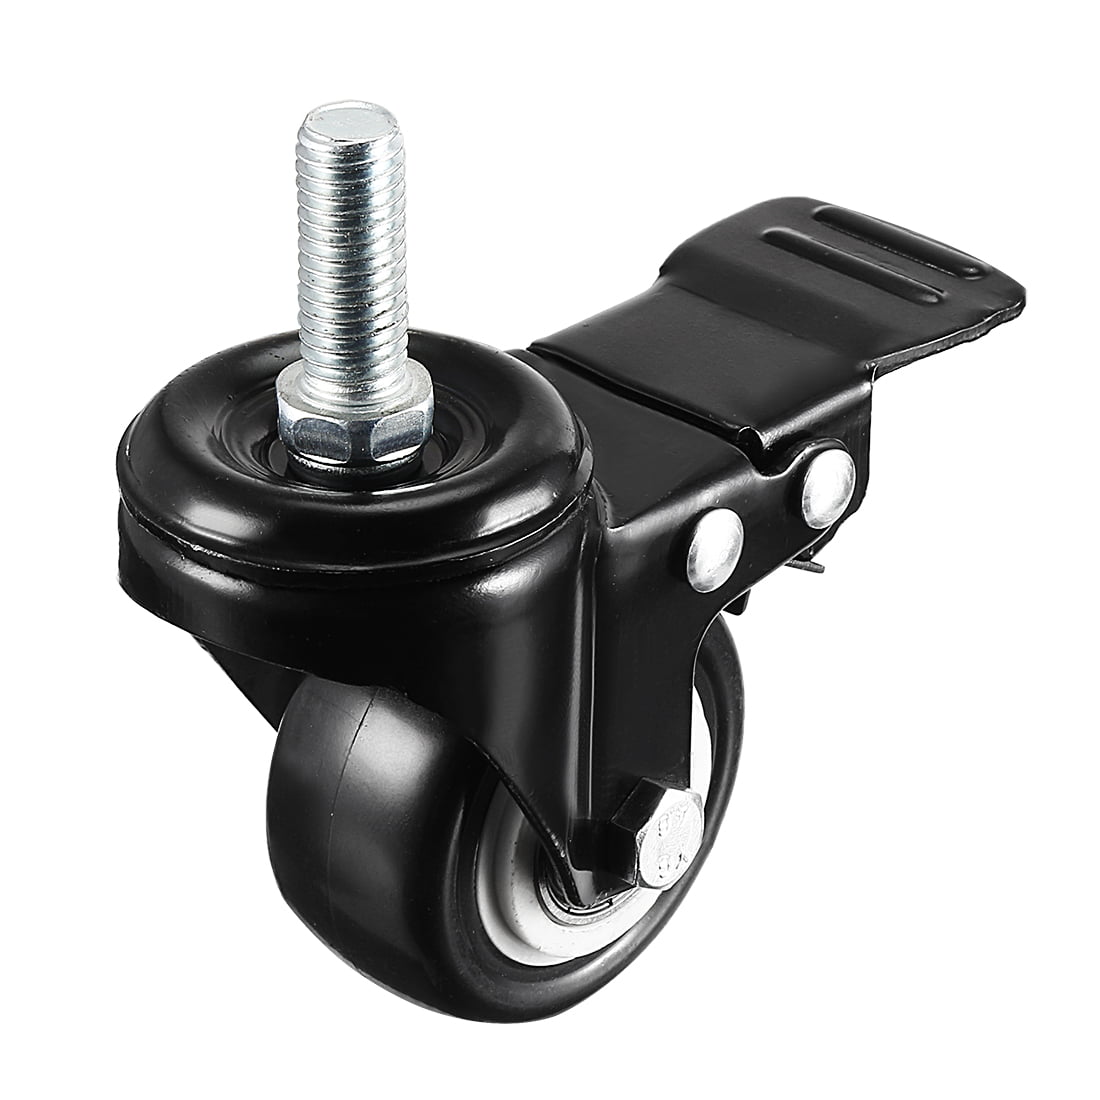 M10 x 25mm uxcell 1.5 inch Swivel Caster wheels PU 360 Degree Threaded Stem Caster Wheel with Brake Pack of 4 a18042600ux0160 330lb Total Load Capacity 